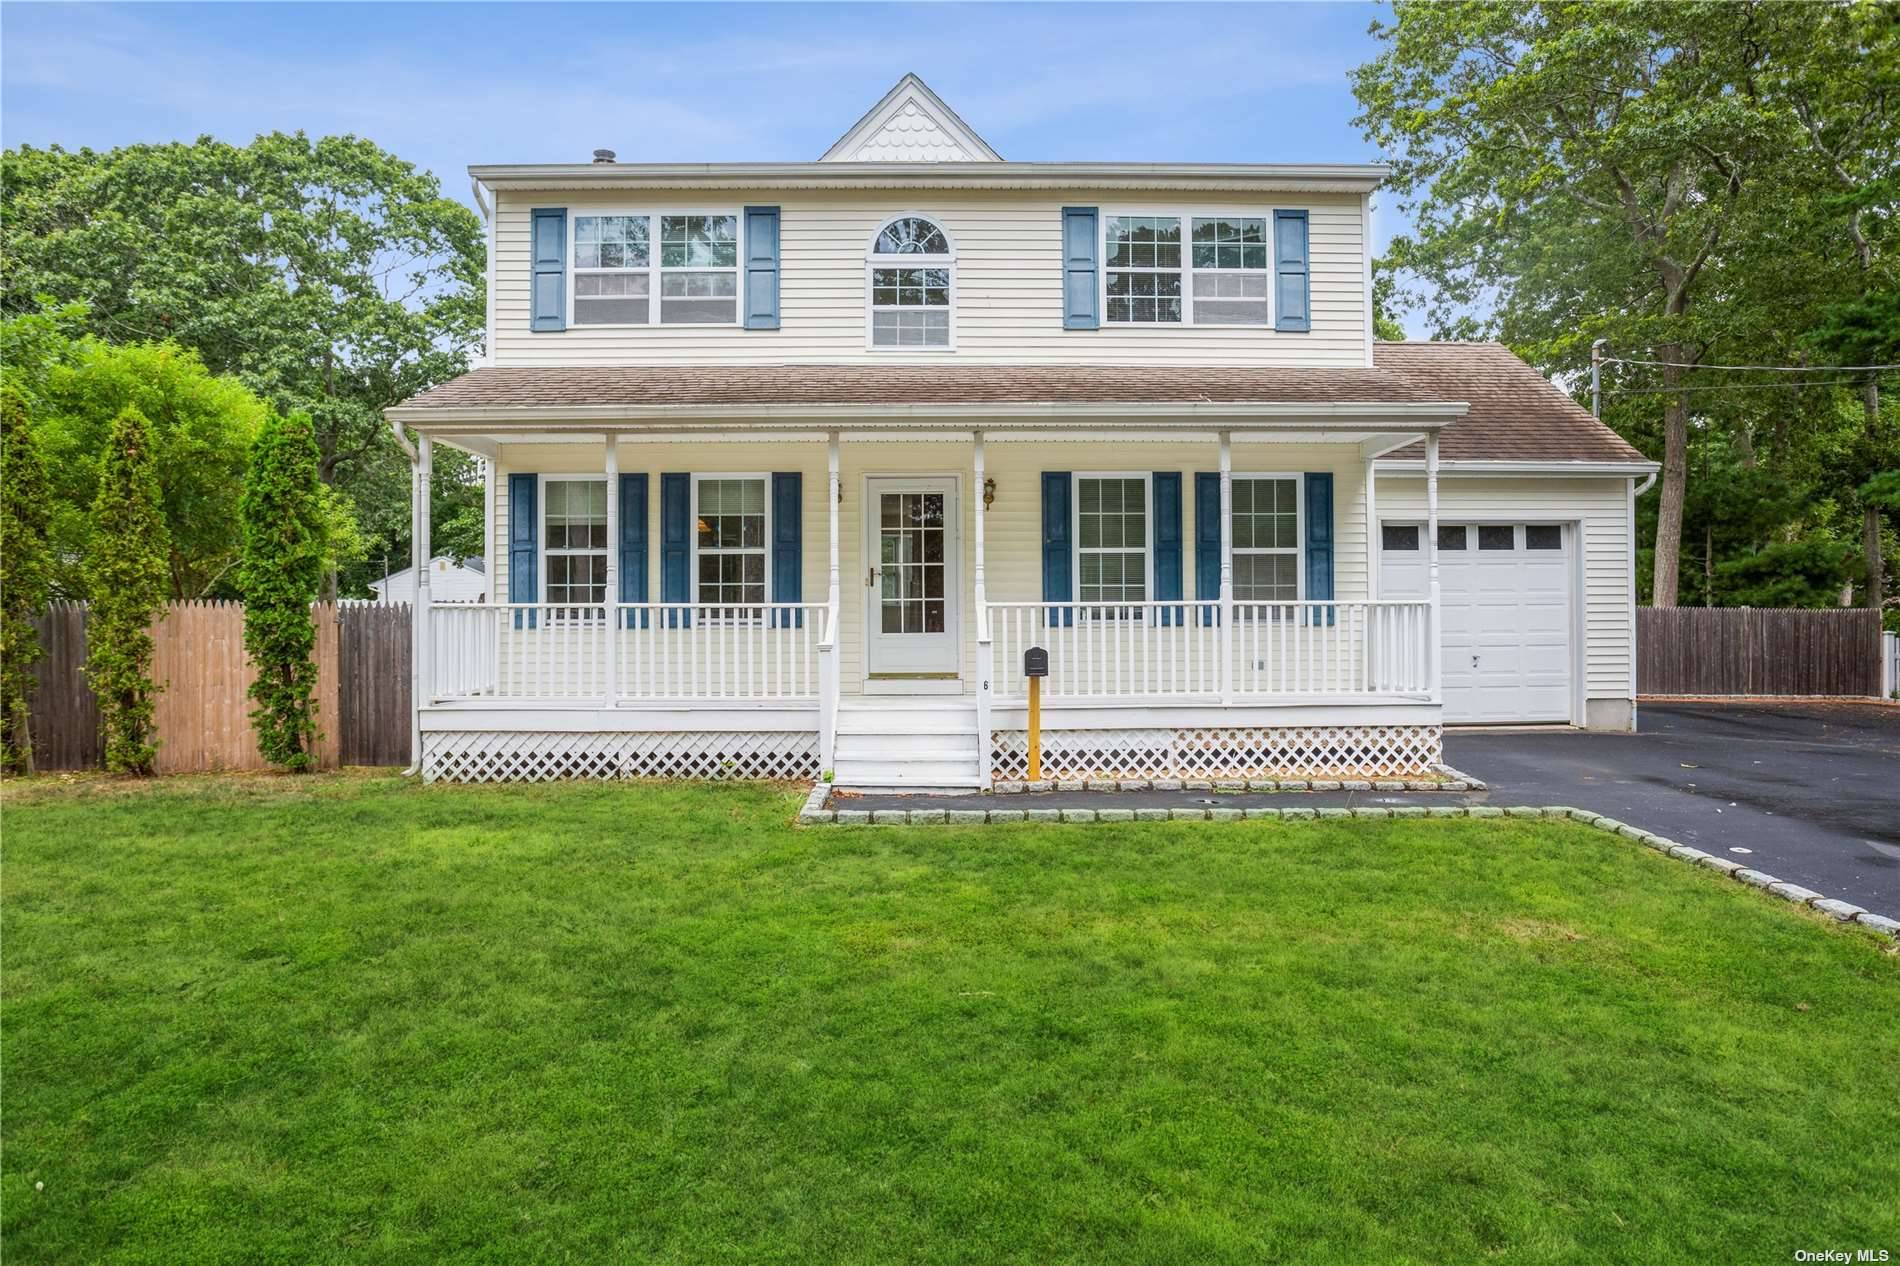 Make this Wonderful Speonk Colonial Your Next Home Sweet Home in the Hamptons Area !